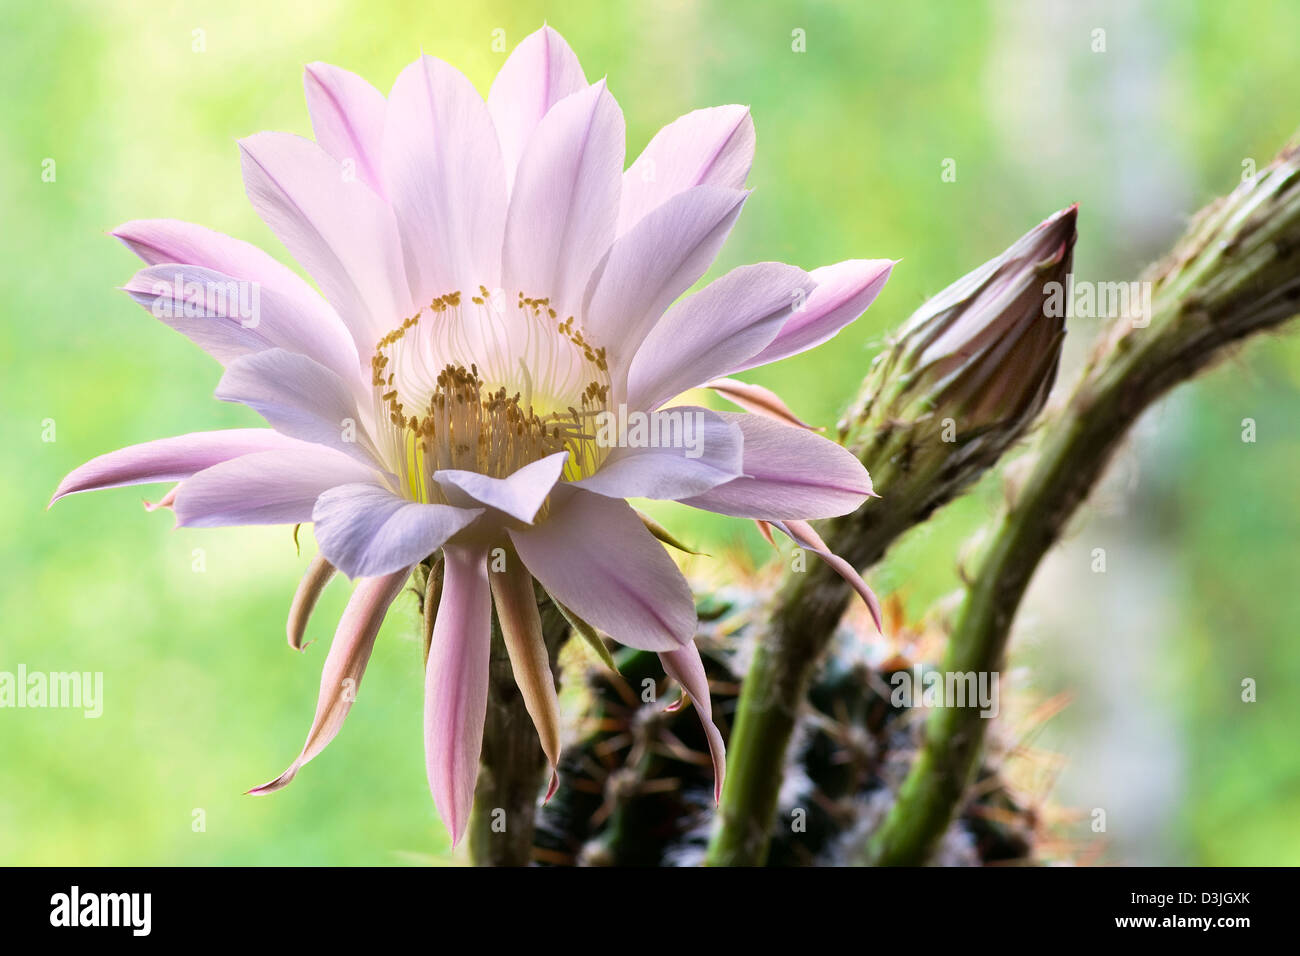 Pink flowers of a cactus close up Stock Photo